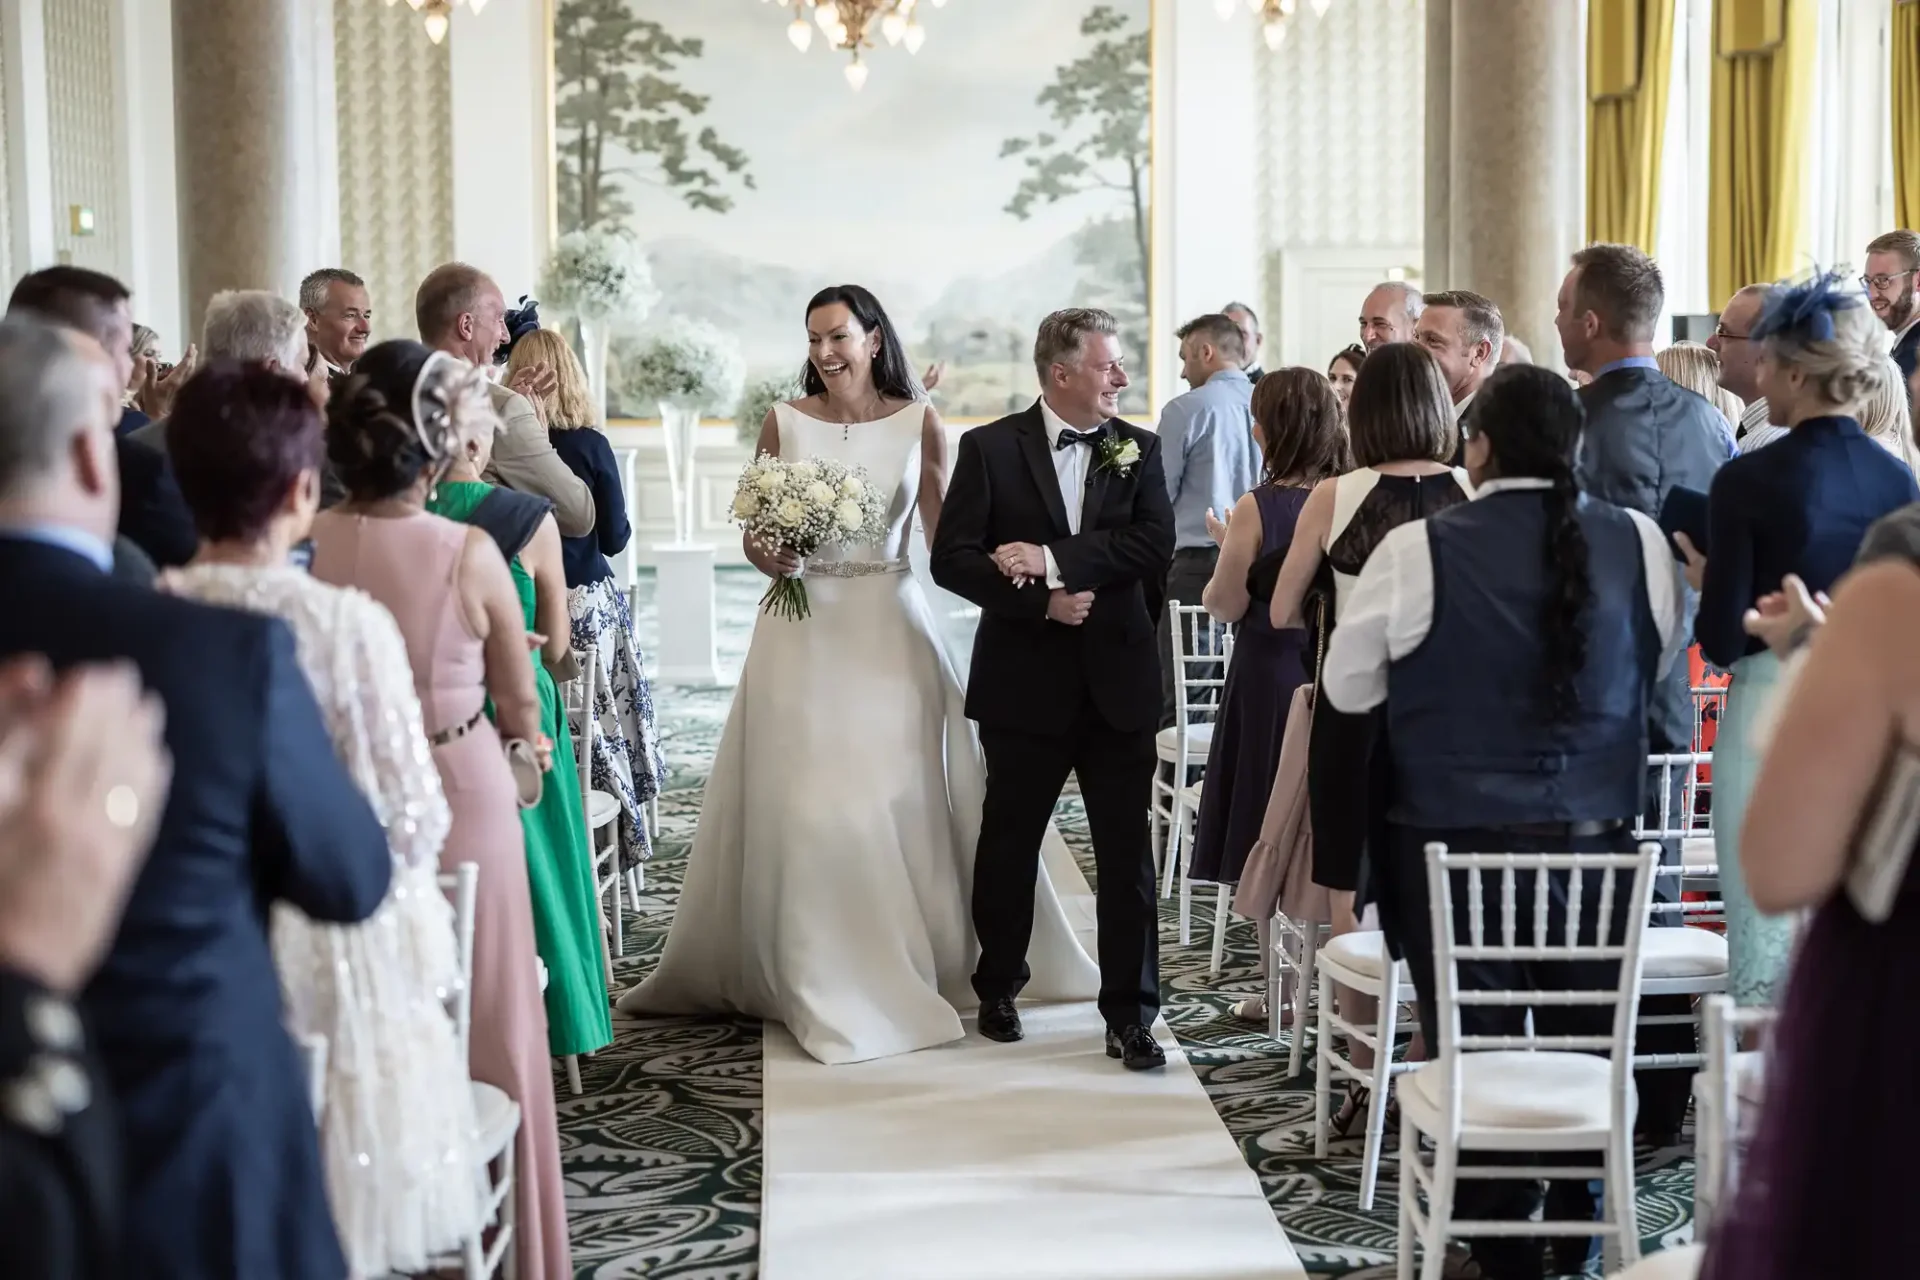 A bride and groom walk down the aisle, smiling, surrounded by applauding guests in an elegant room.